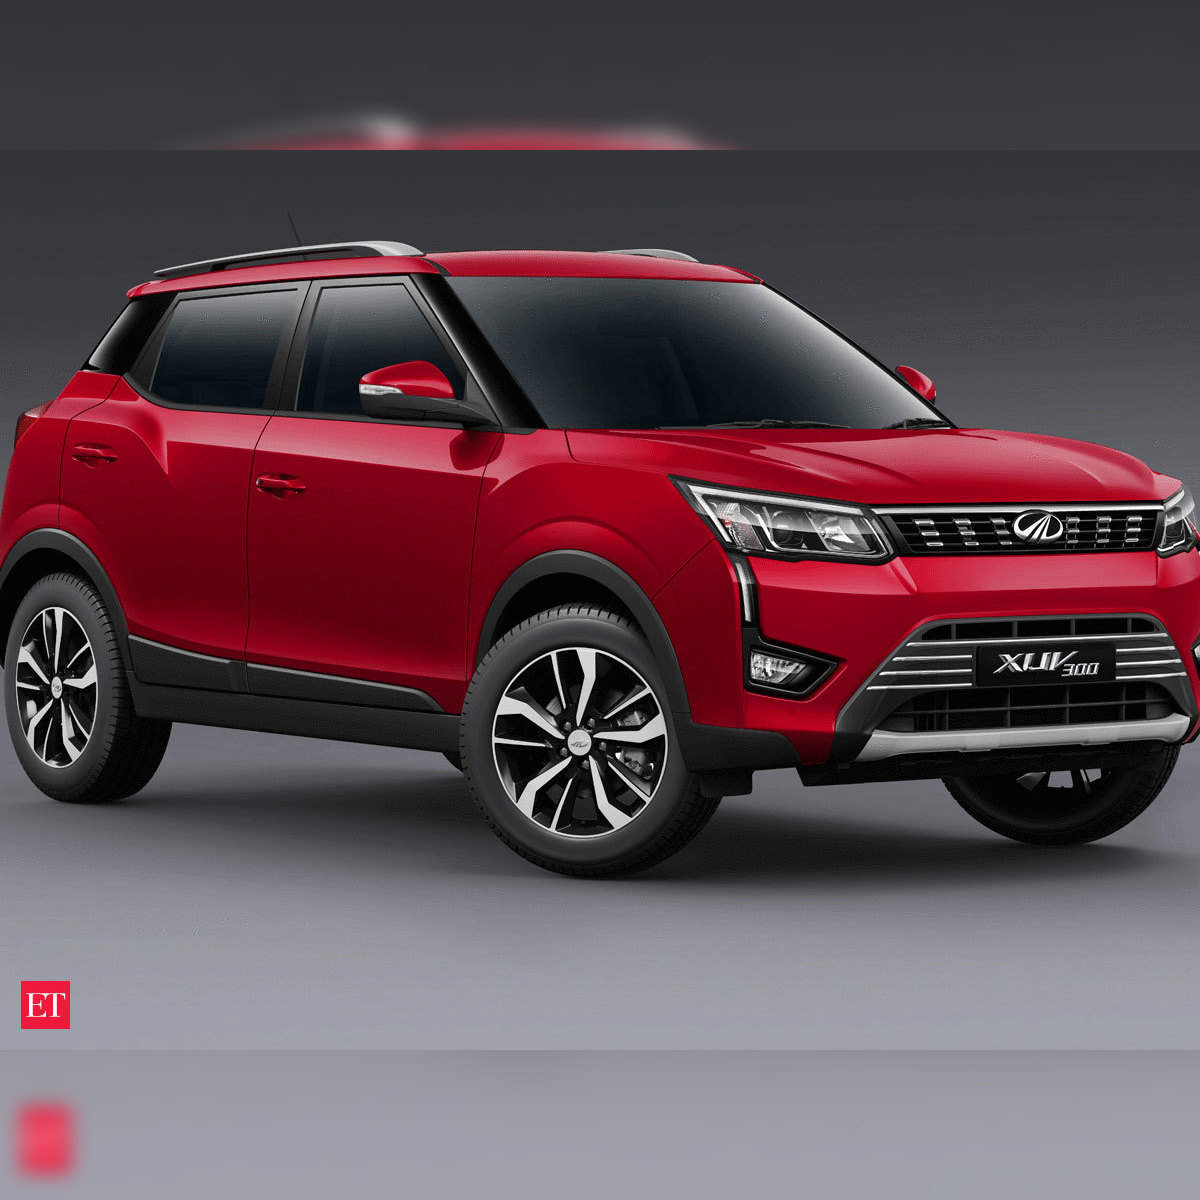 mahindra launches xuv 300 priced between rs 7 9 lakh to 10 8 lakh